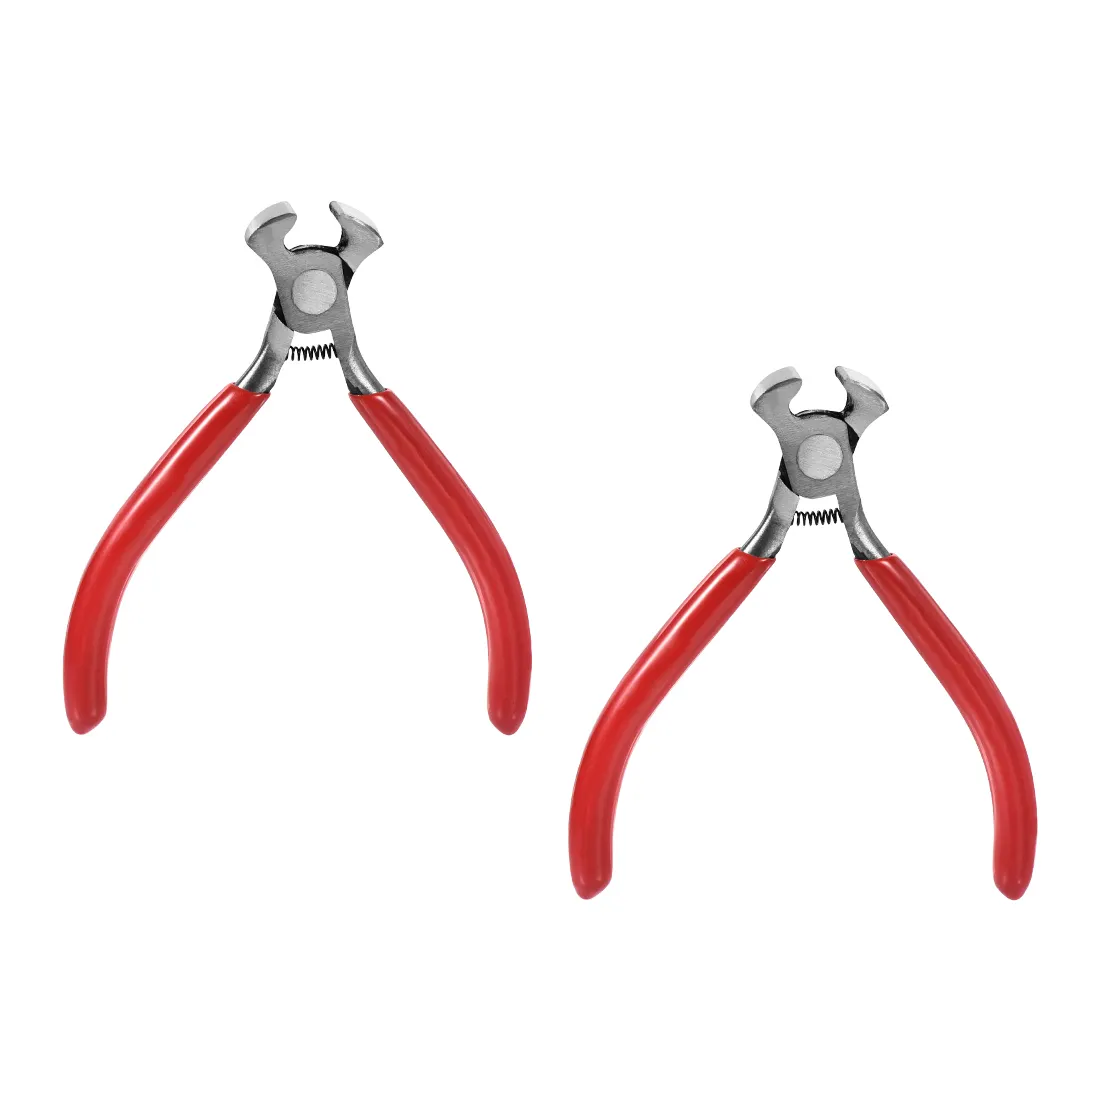 End Cutting Pliers 4 Inch Mini Precision End Nippers Wire Cutter Pliers Nail Puller Tool 2 Pcs